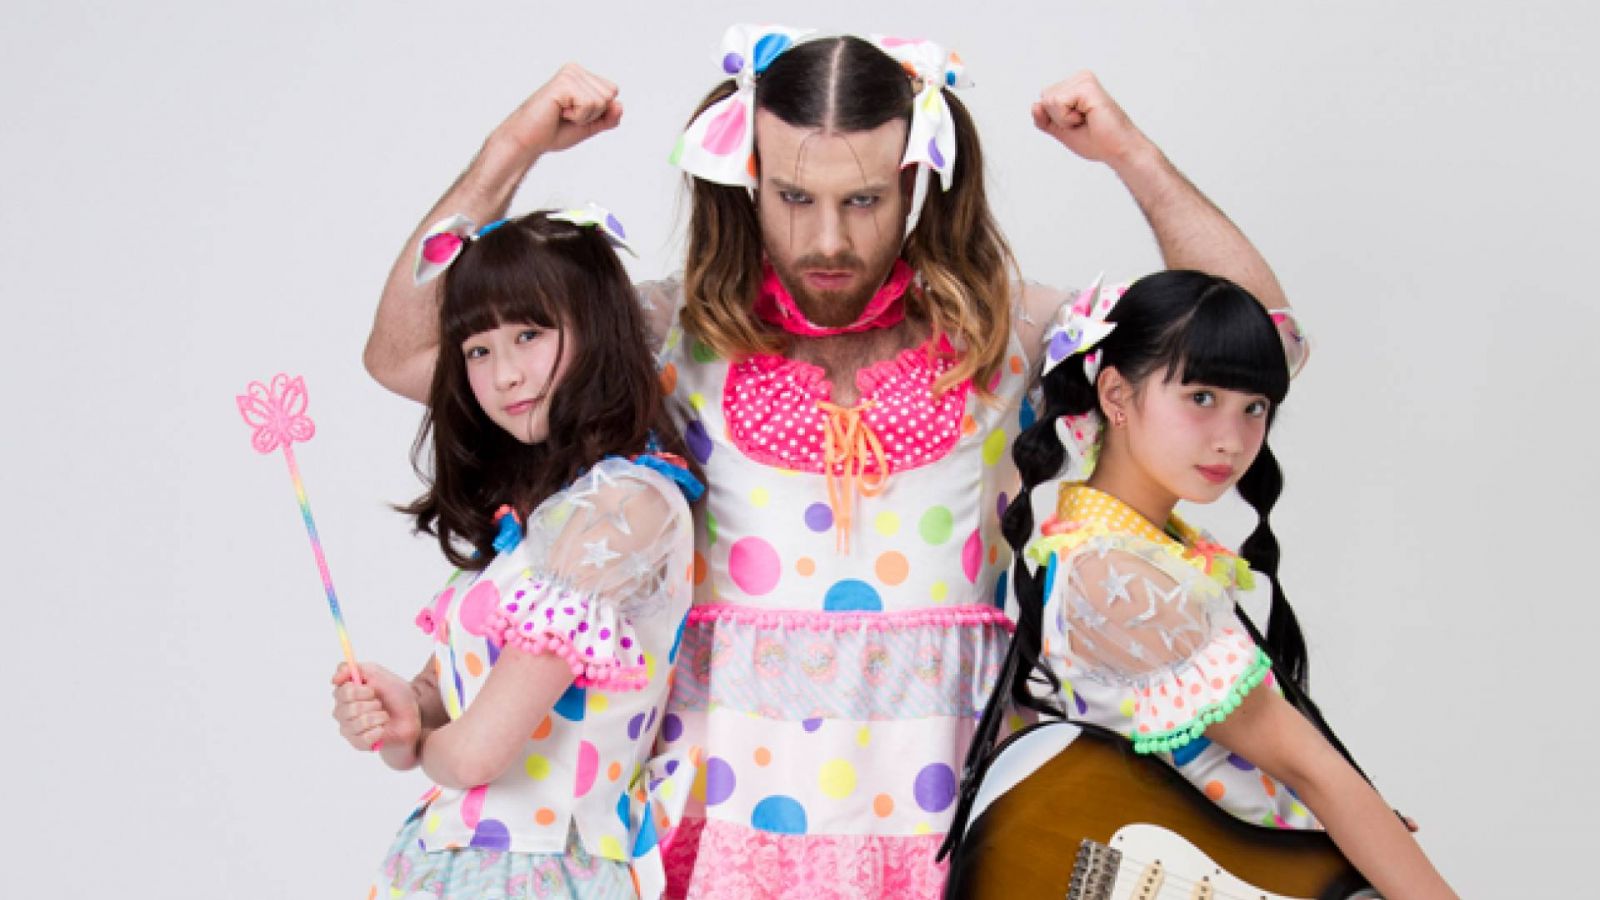 Ladybeard quitte LADYBABY © 2015 clearstone Co., Ltd. All rights reserved.